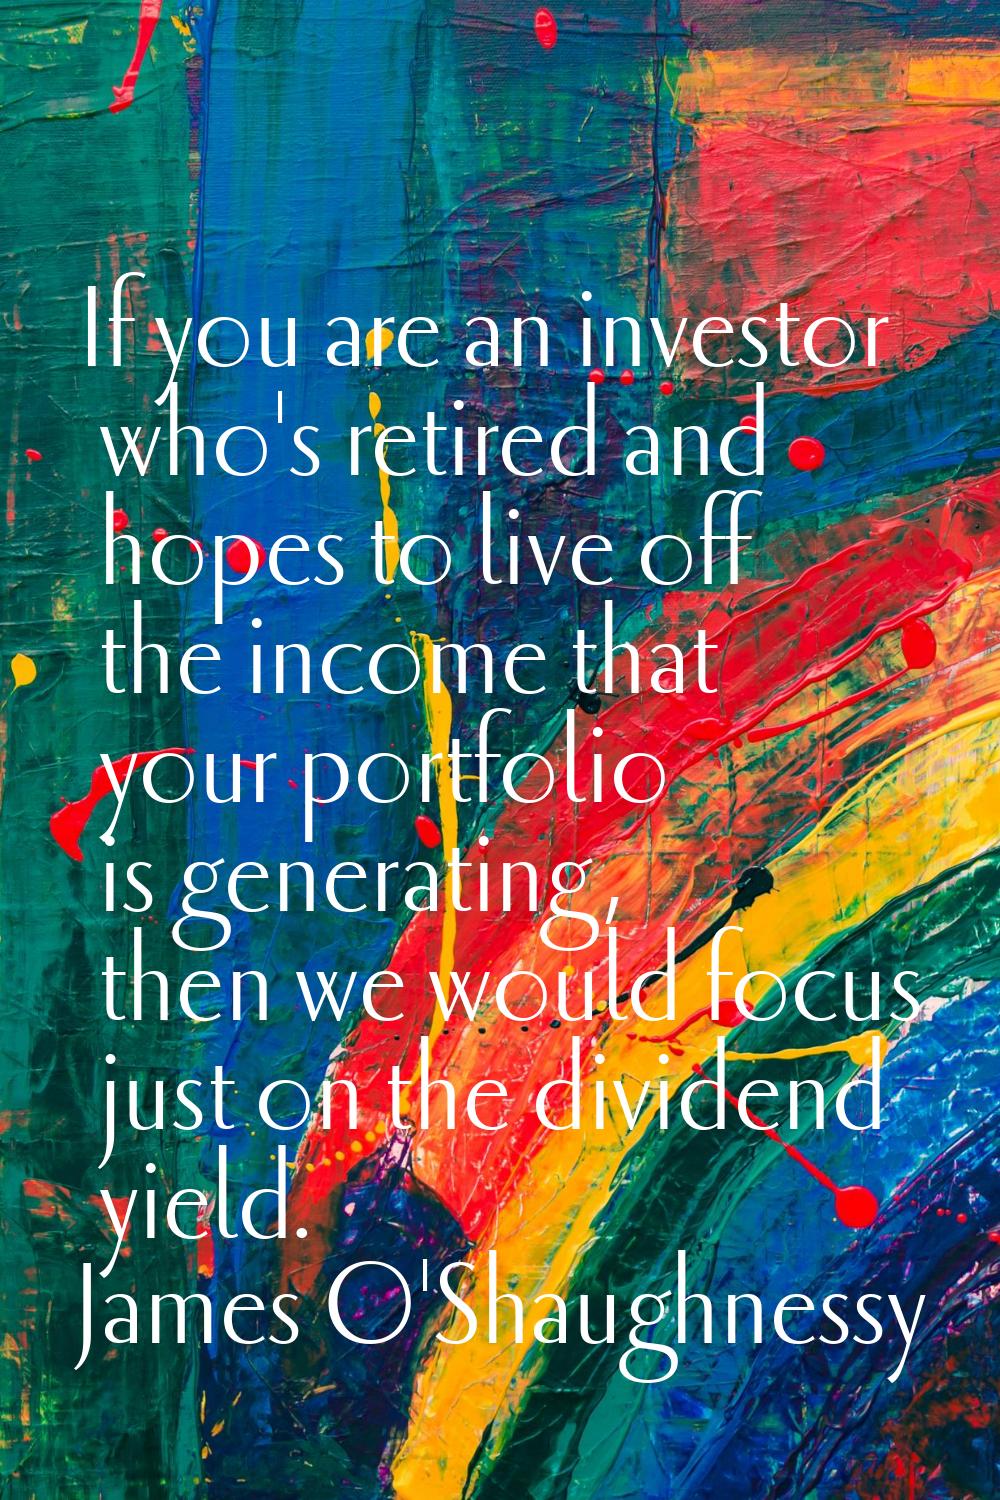 If you are an investor who's retired and hopes to live off the income that your portfolio is genera